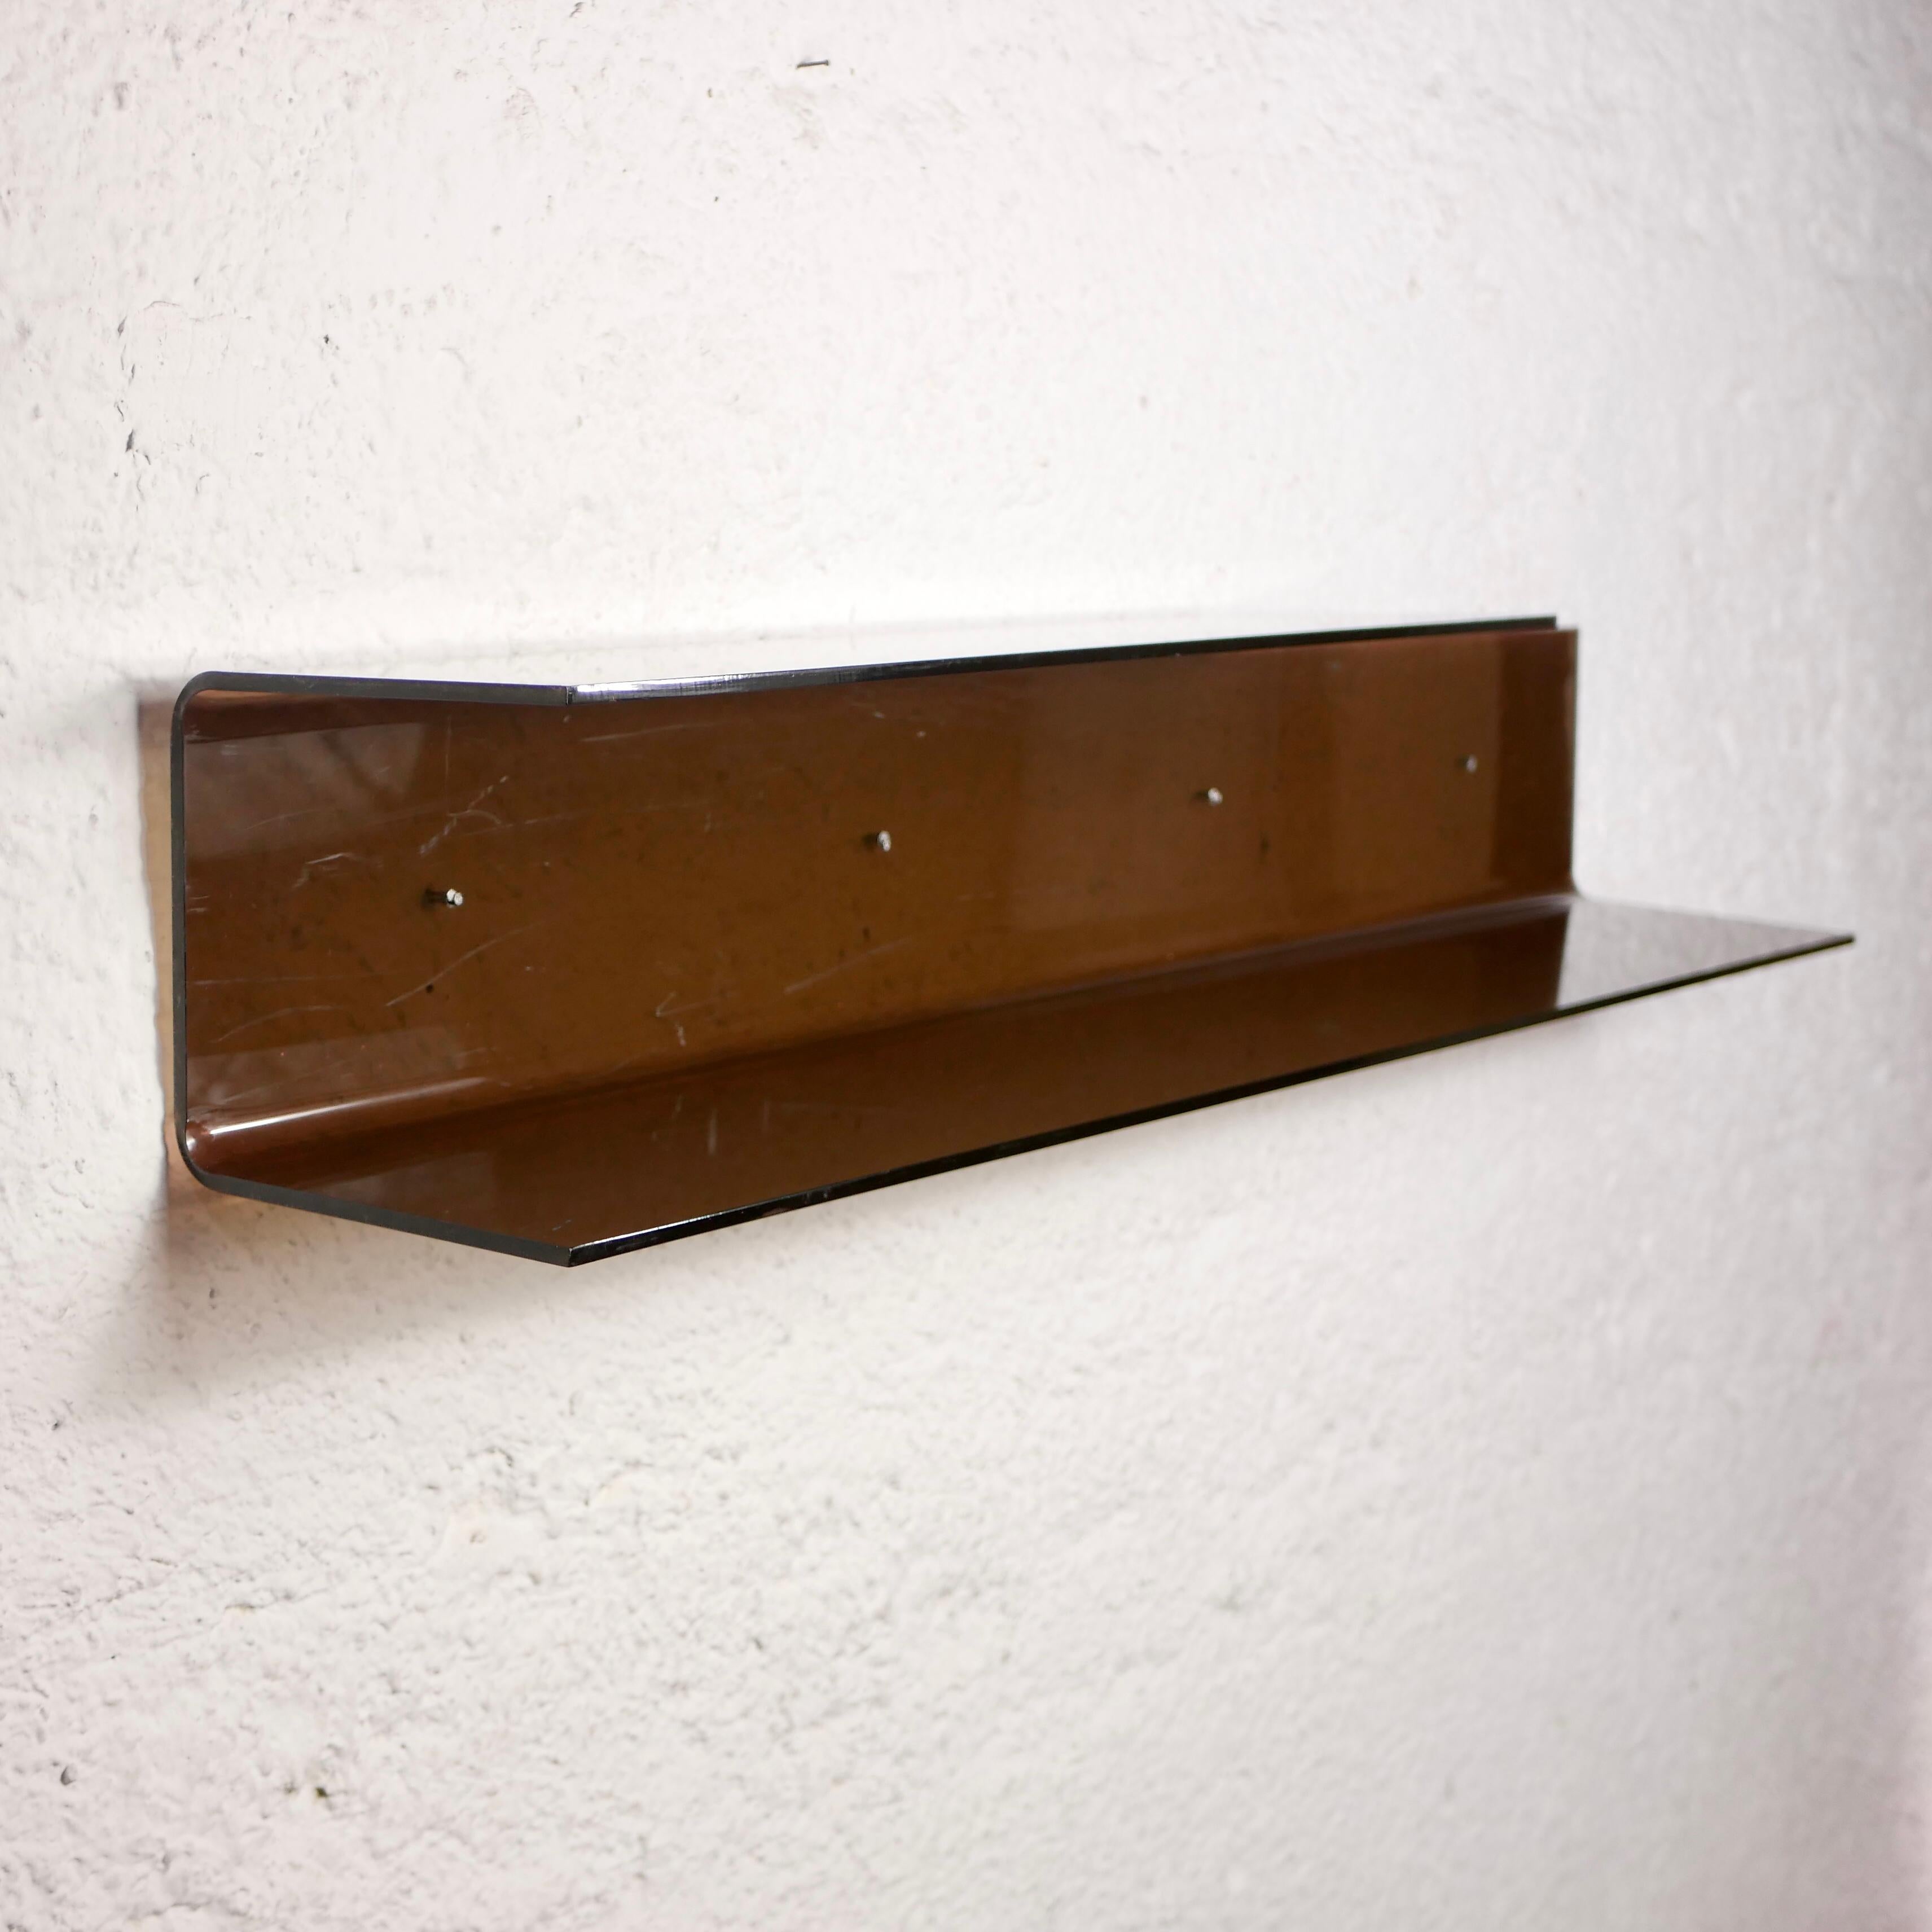 Molded Large Smoked Plexi Wall Shelf from the 1970s